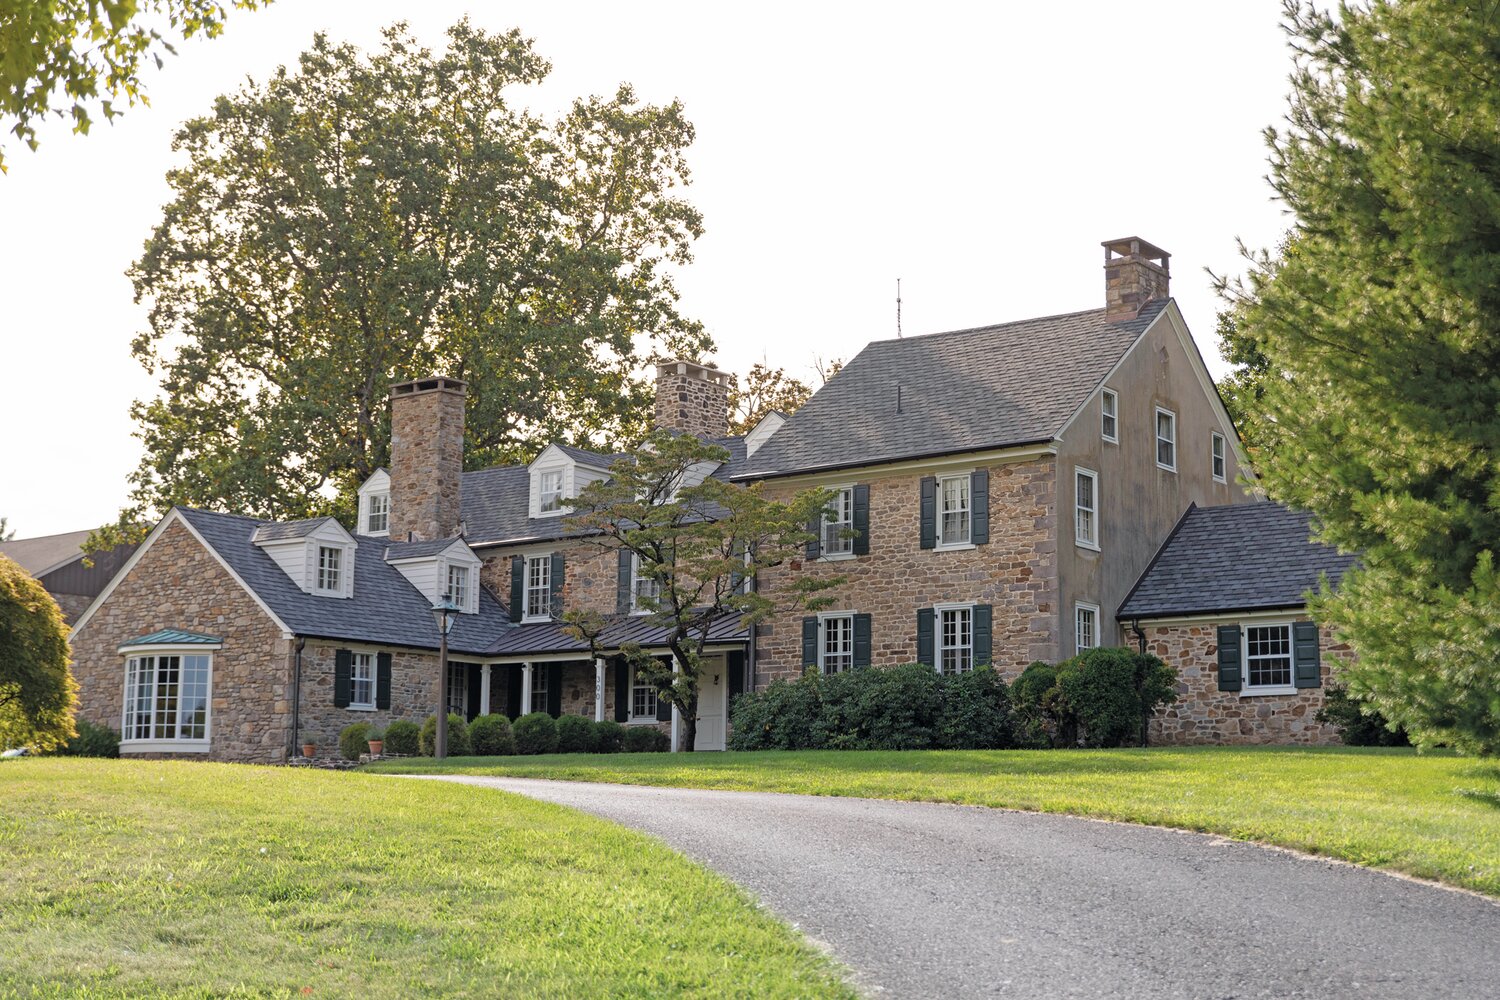 The Inn at Fox Briar Farm is an eight-bedroom, 18th century bed and breakfast that has been extensively renovated and offers views of three ponds, stone outbuildings, fields, woods, and old, towering shade trees.